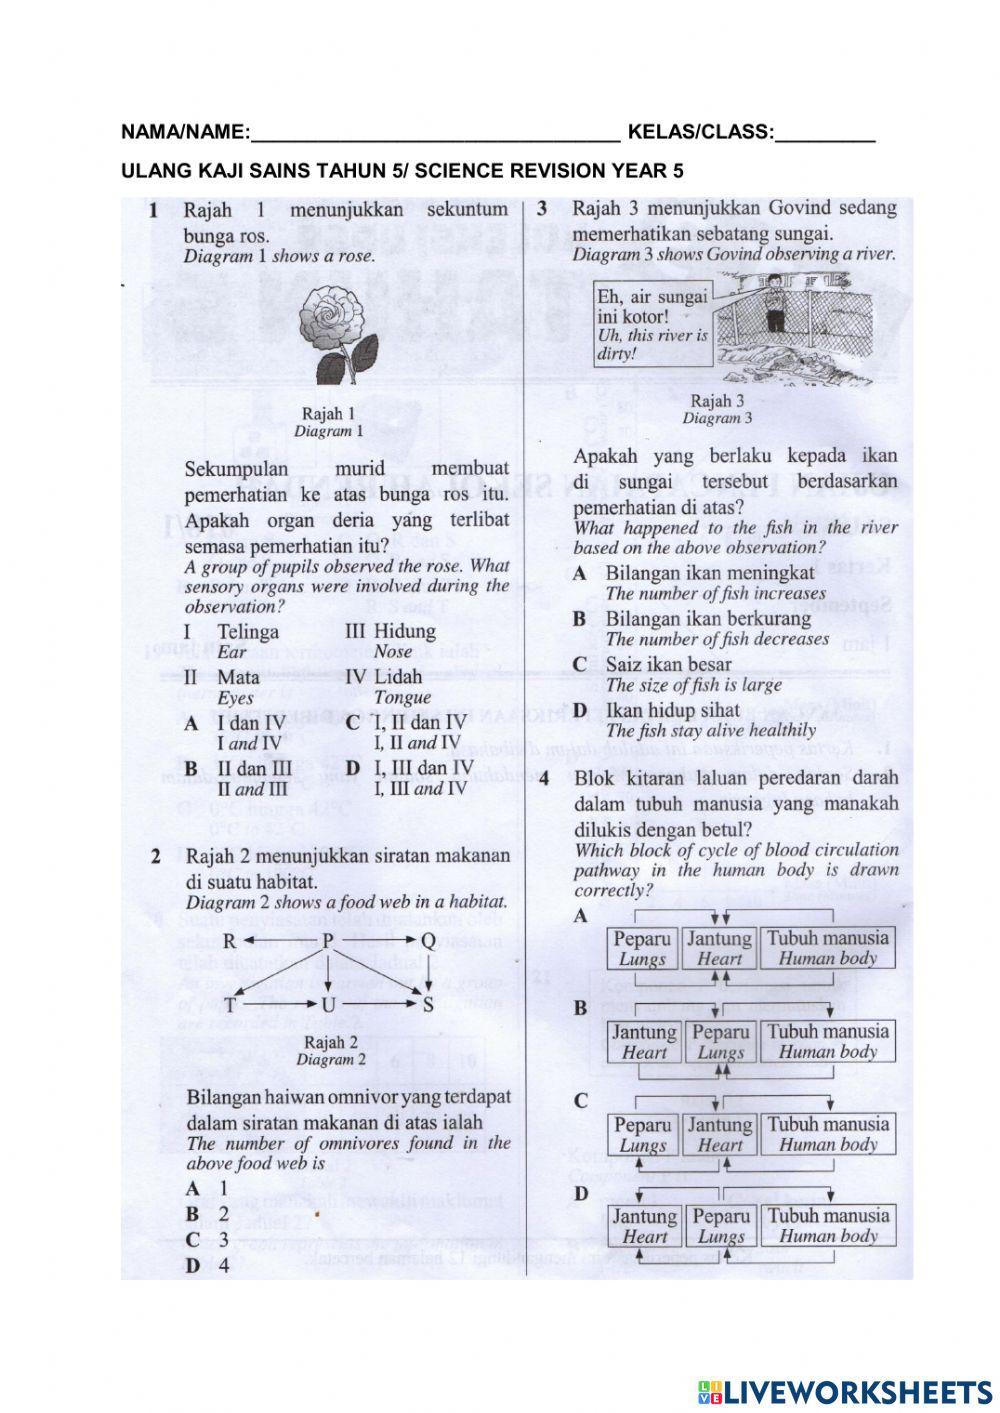 Revision science year 5 (4)